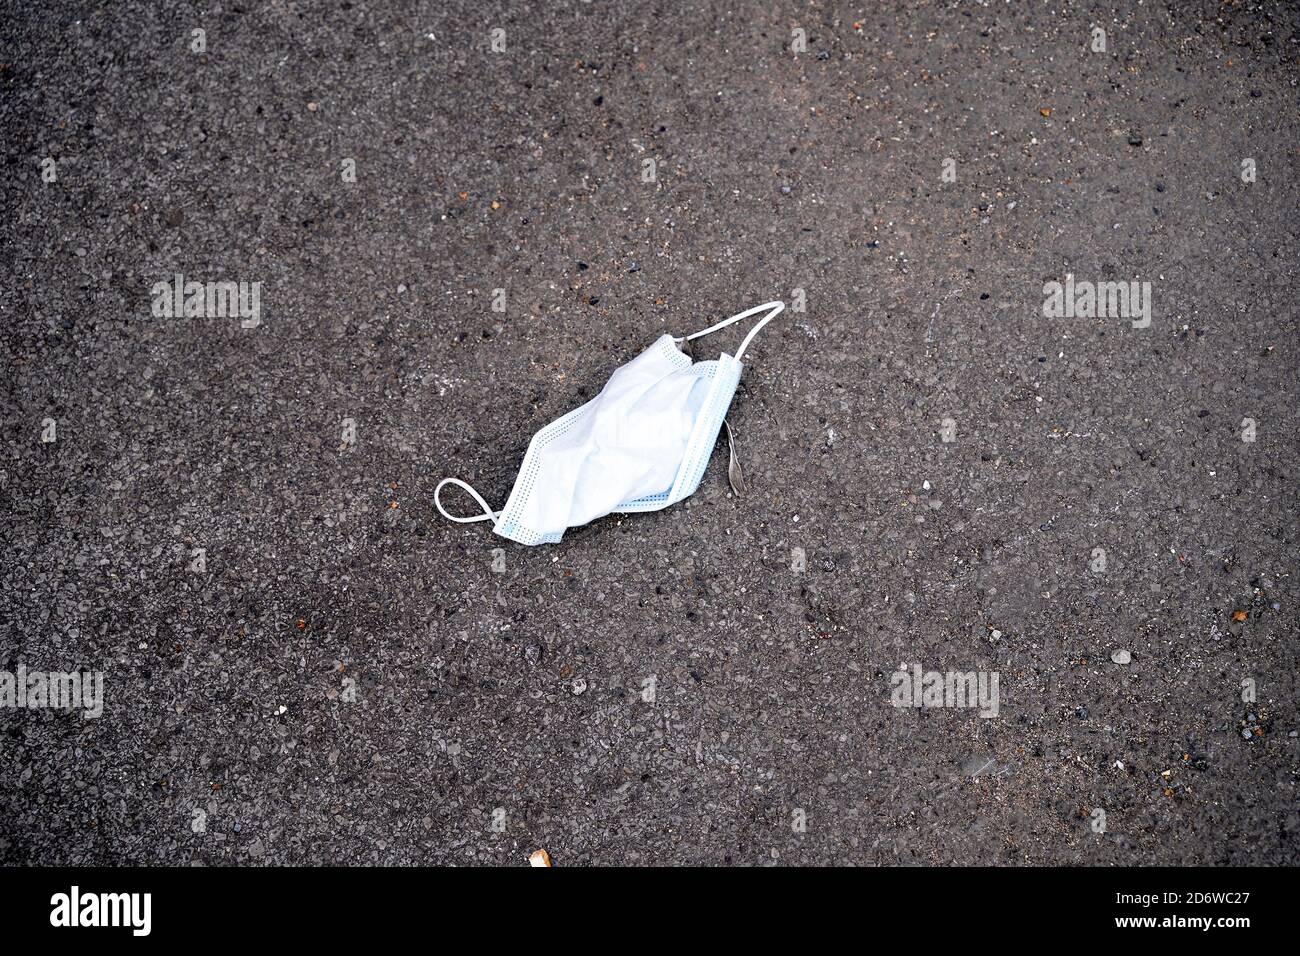 Discarded disposable PPE face mask Stock Photo